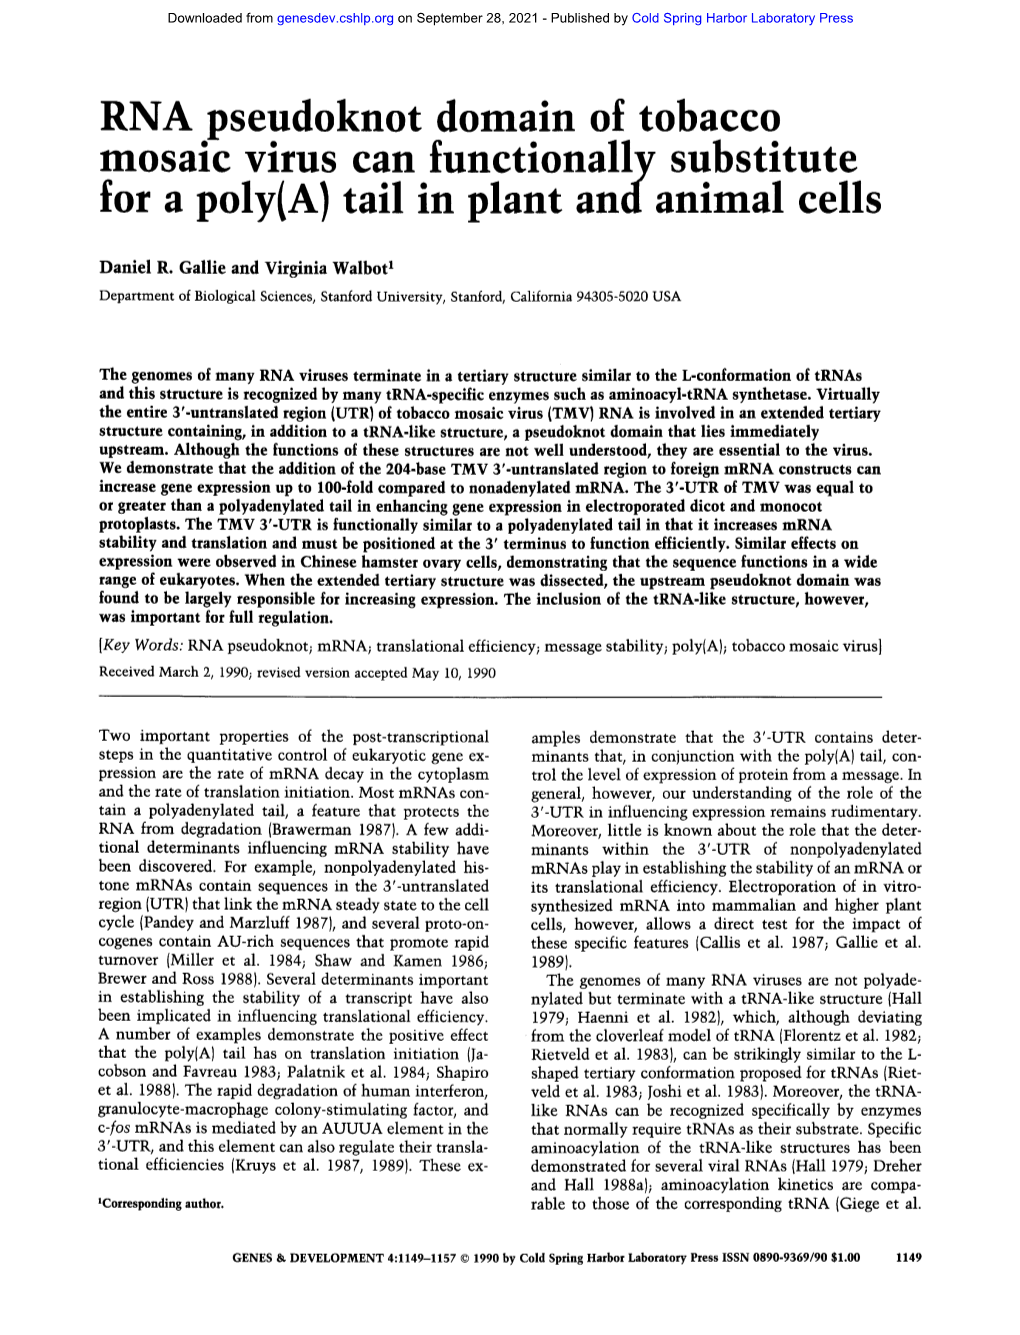 RNA Pseudoknot Domain of Tobacco Mosaic Virus Can Functionally Substitute for a Poly(A) Tail in Plant Andammal Cells